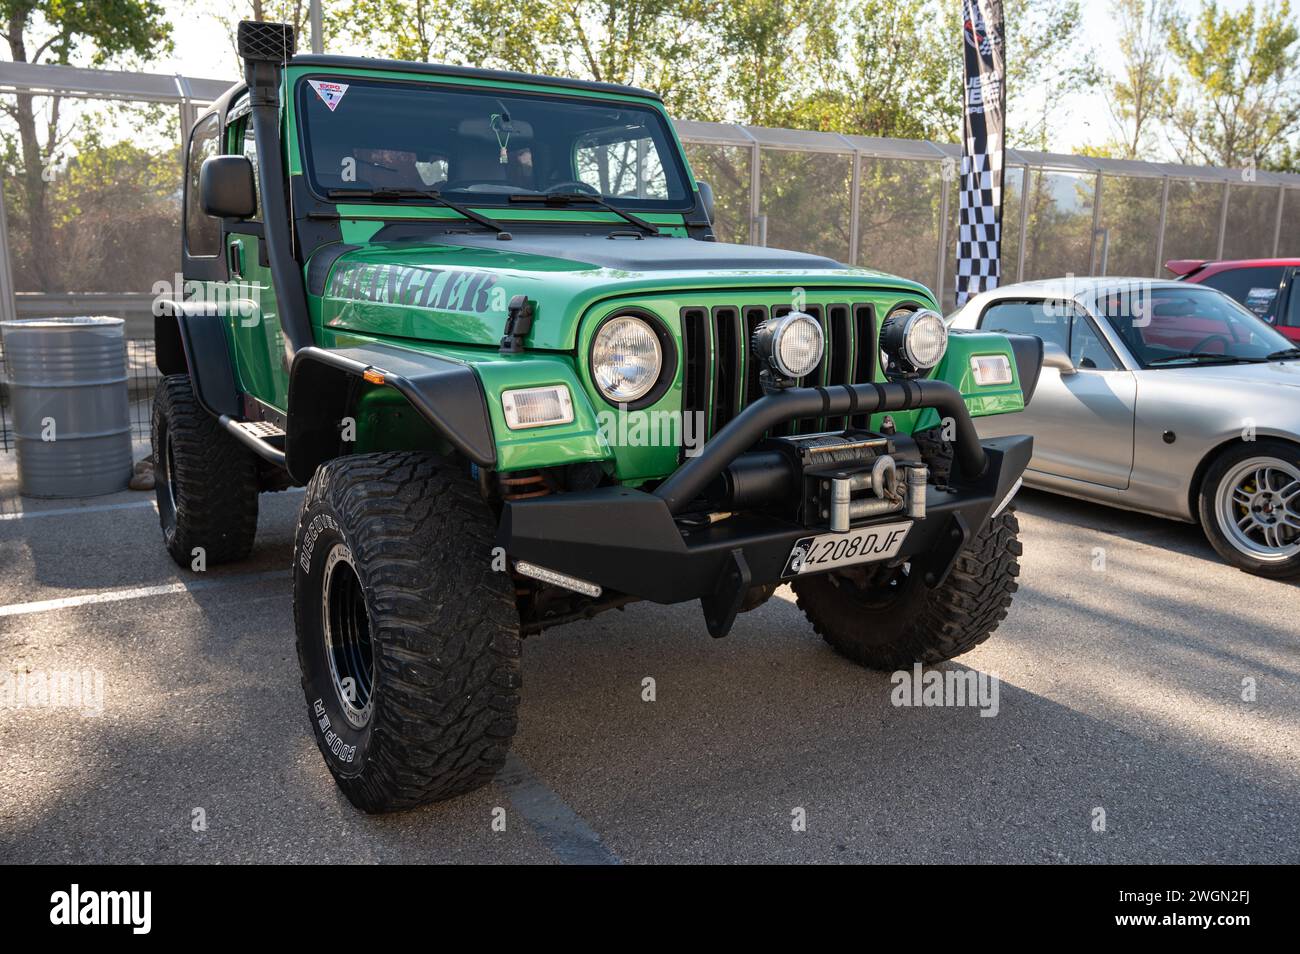 Front view of a green Jeep Wrangler ready for adventure Stock Photo